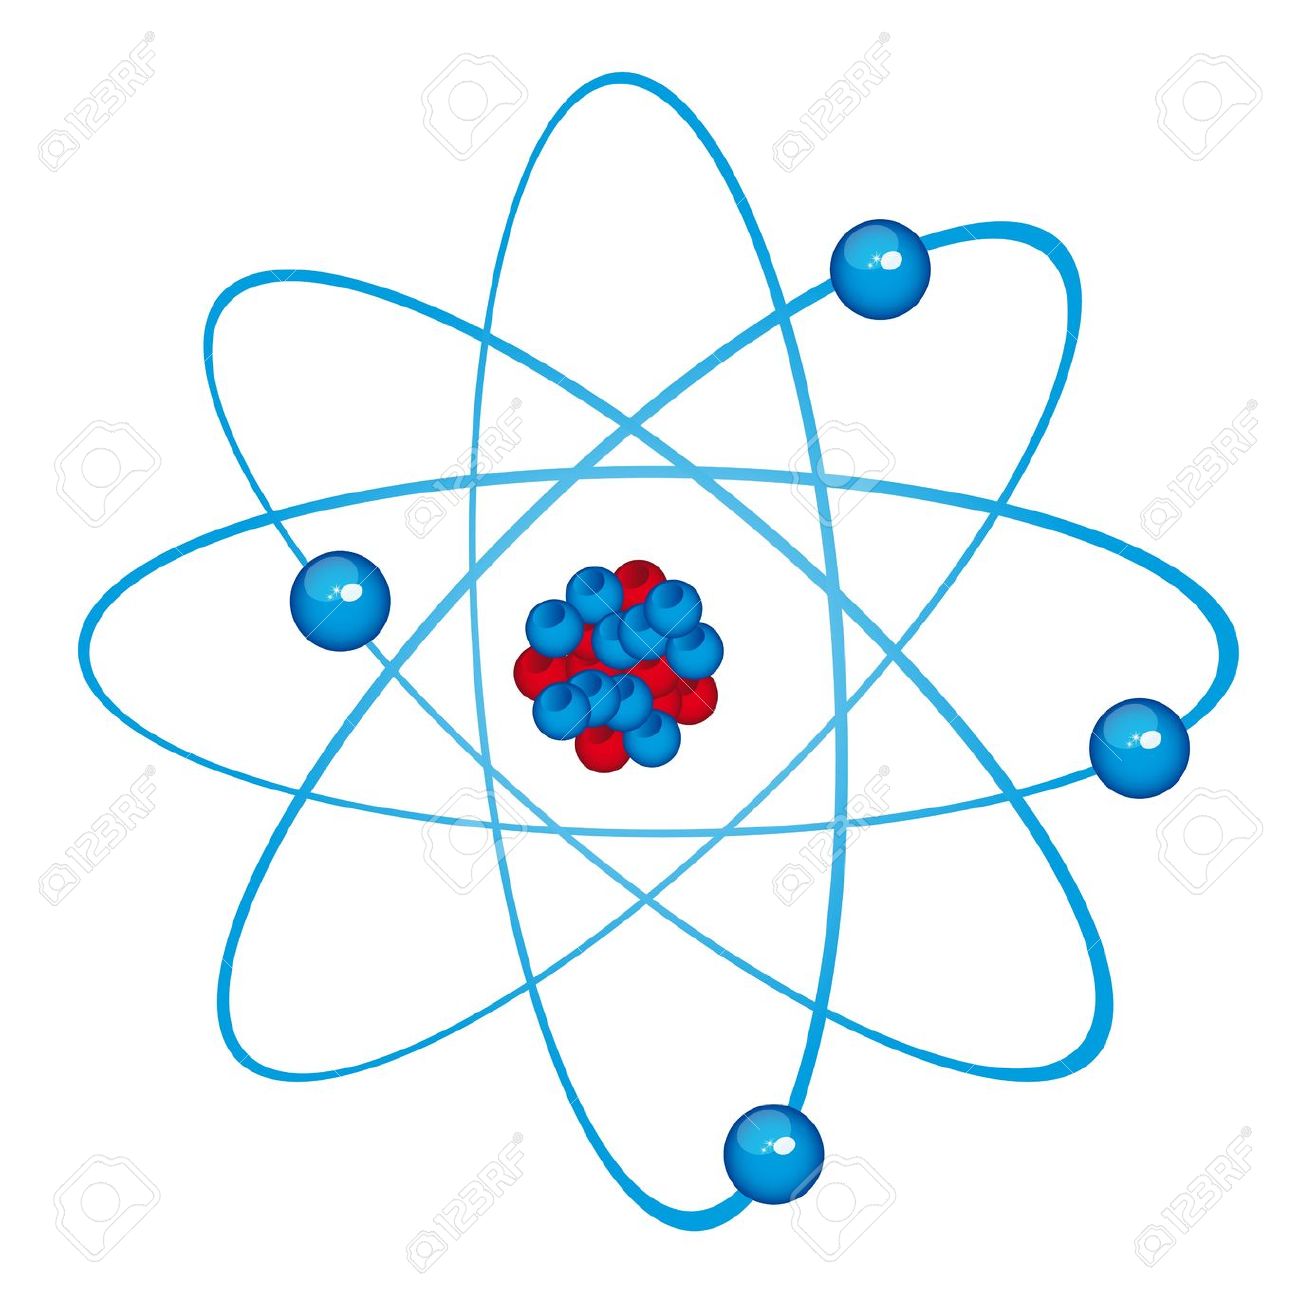 Atom clipart vector. Blue clipground isolated over